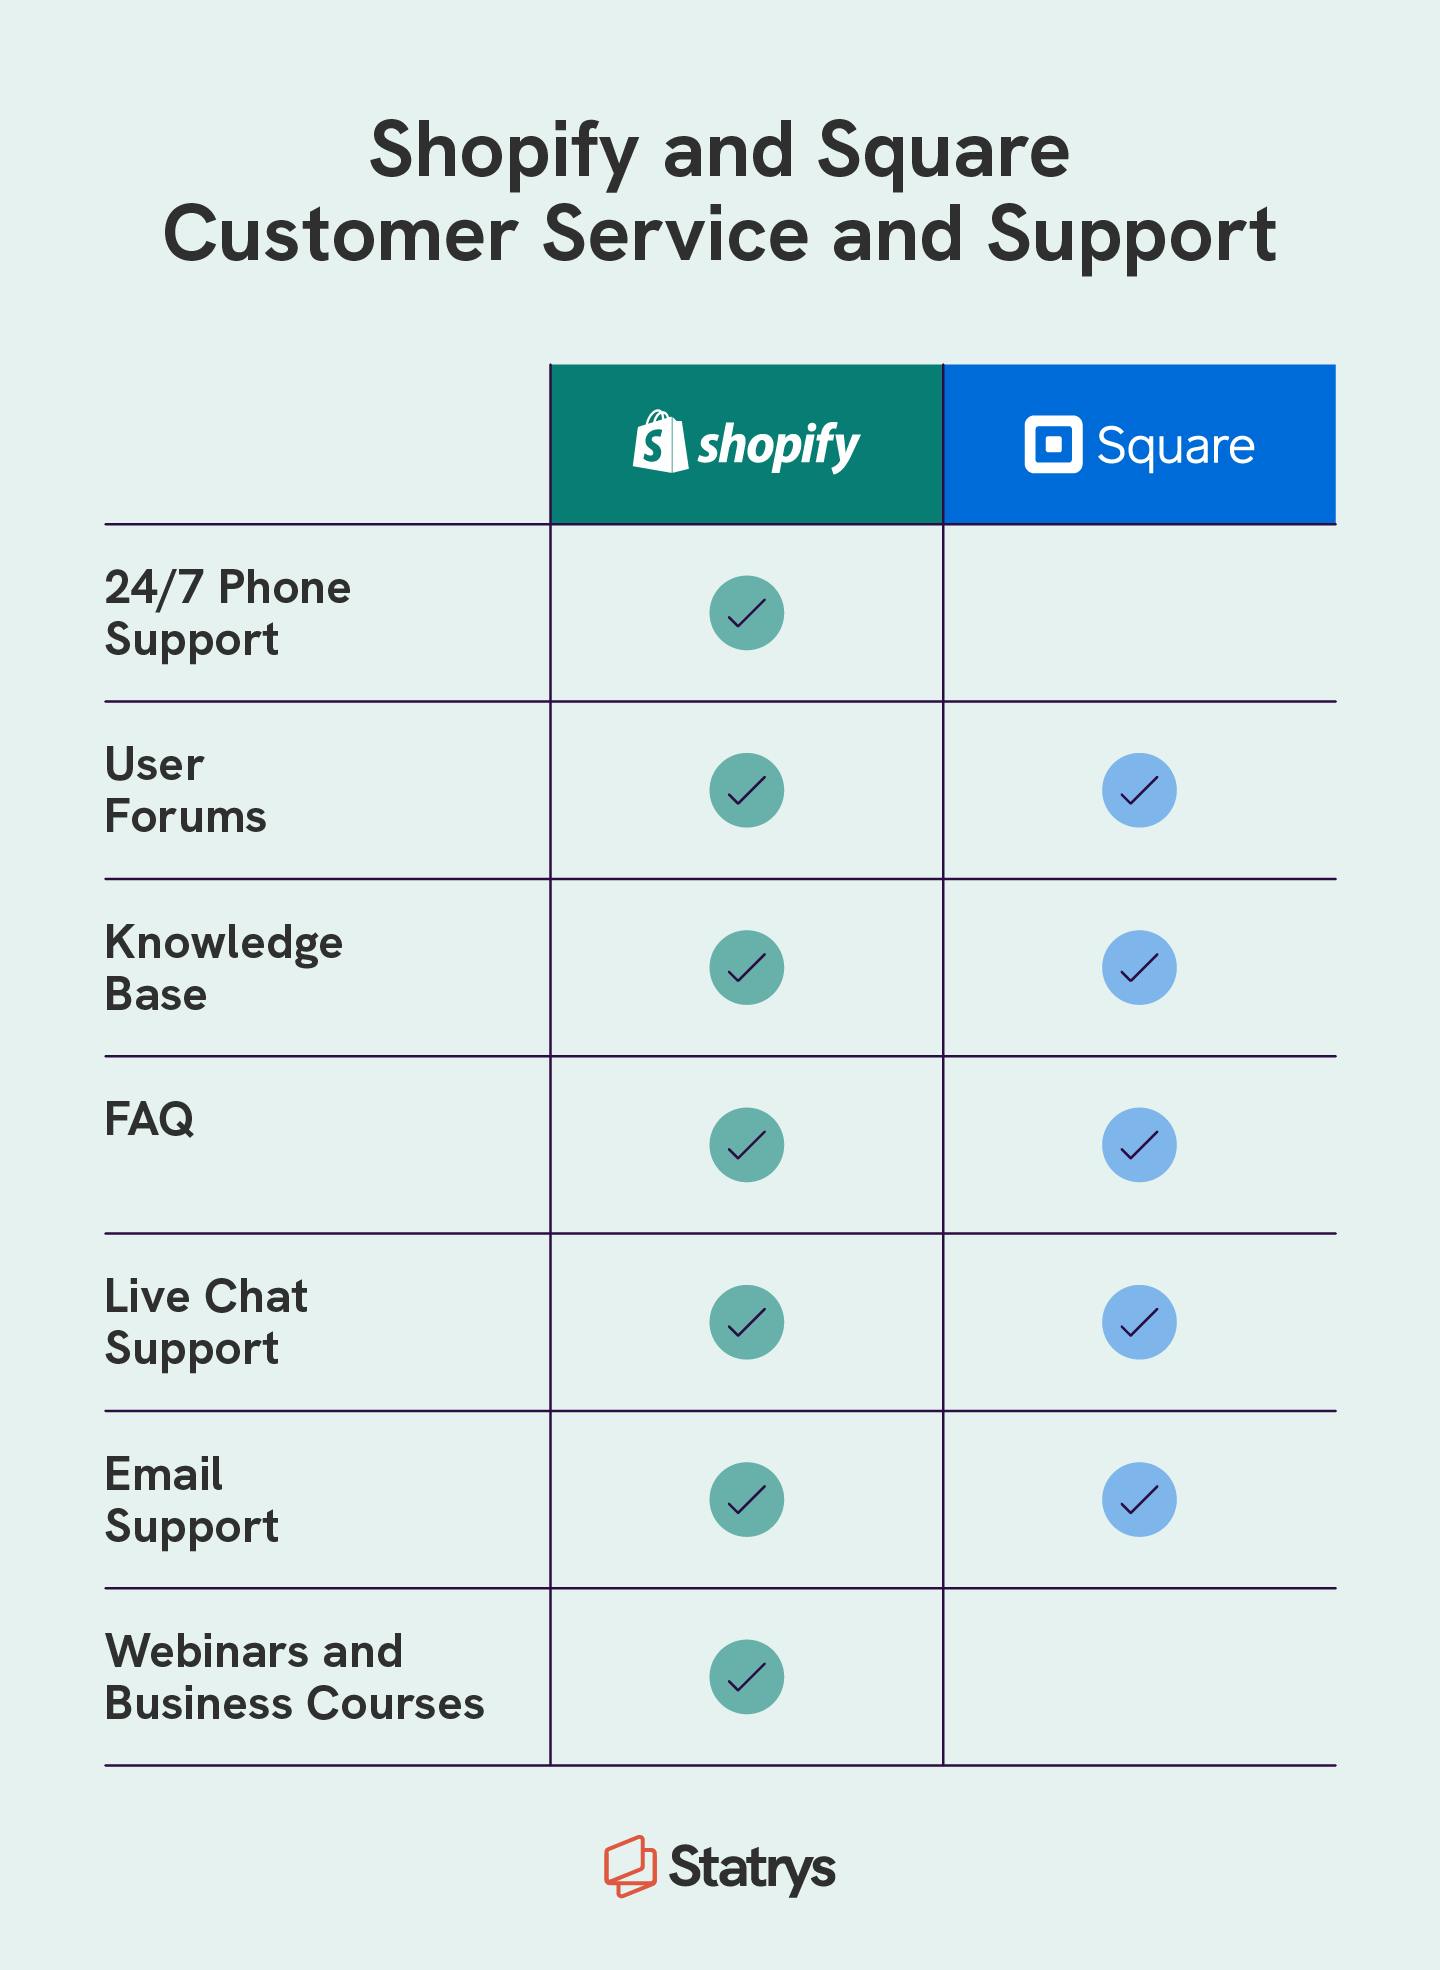 A chart compares Shopify vs Square’s customer service and support.